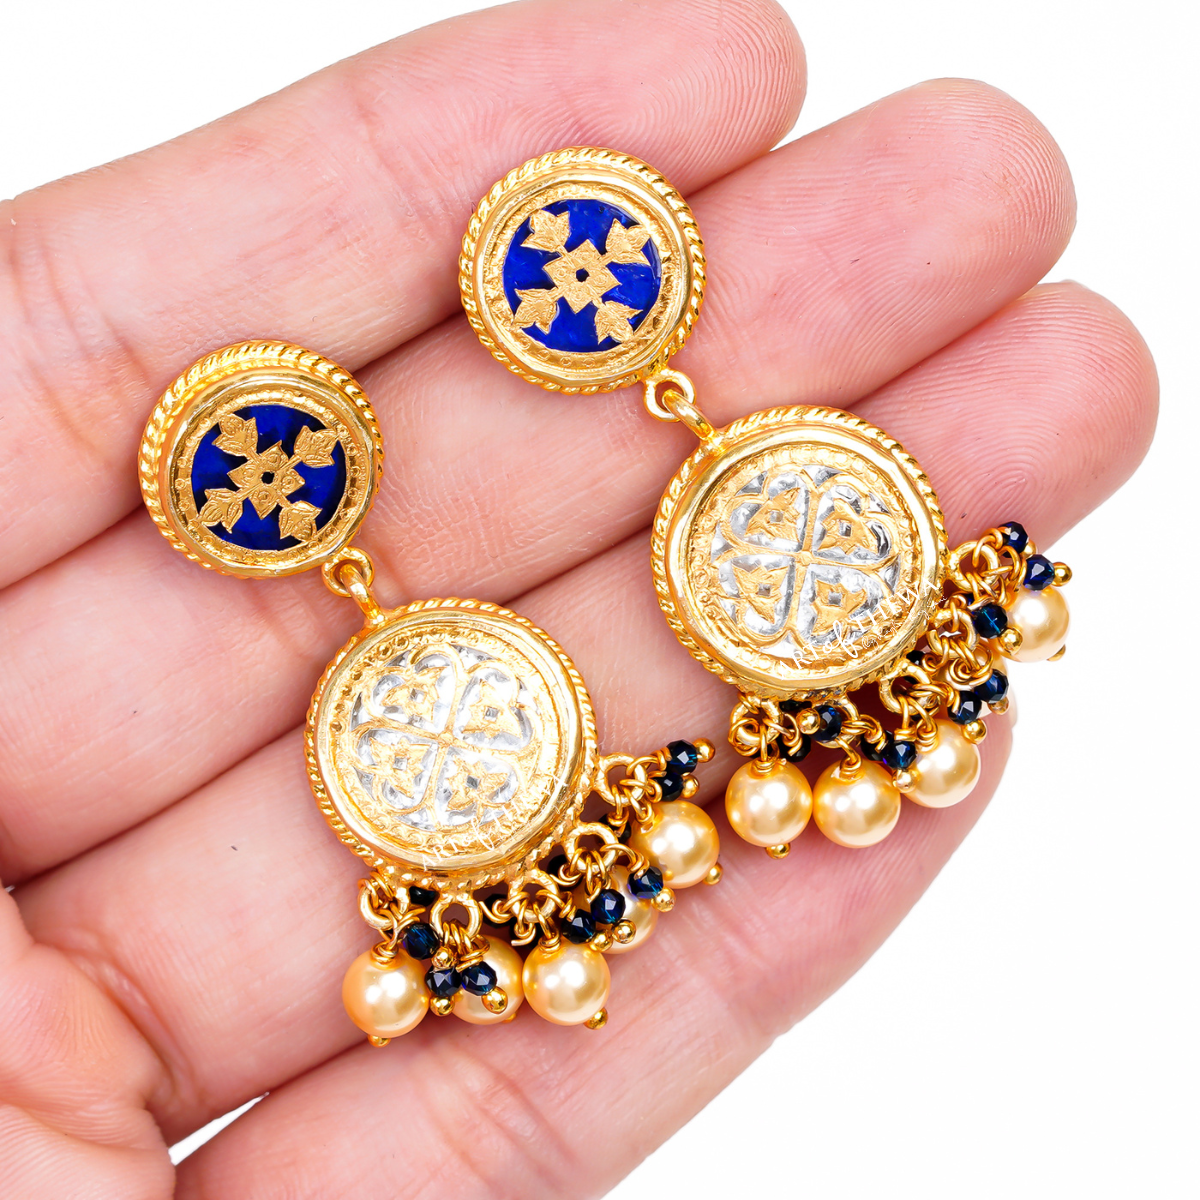 Blue Bianco Thewa Art Latkan Earrings - An Expression of Heritage Royalty